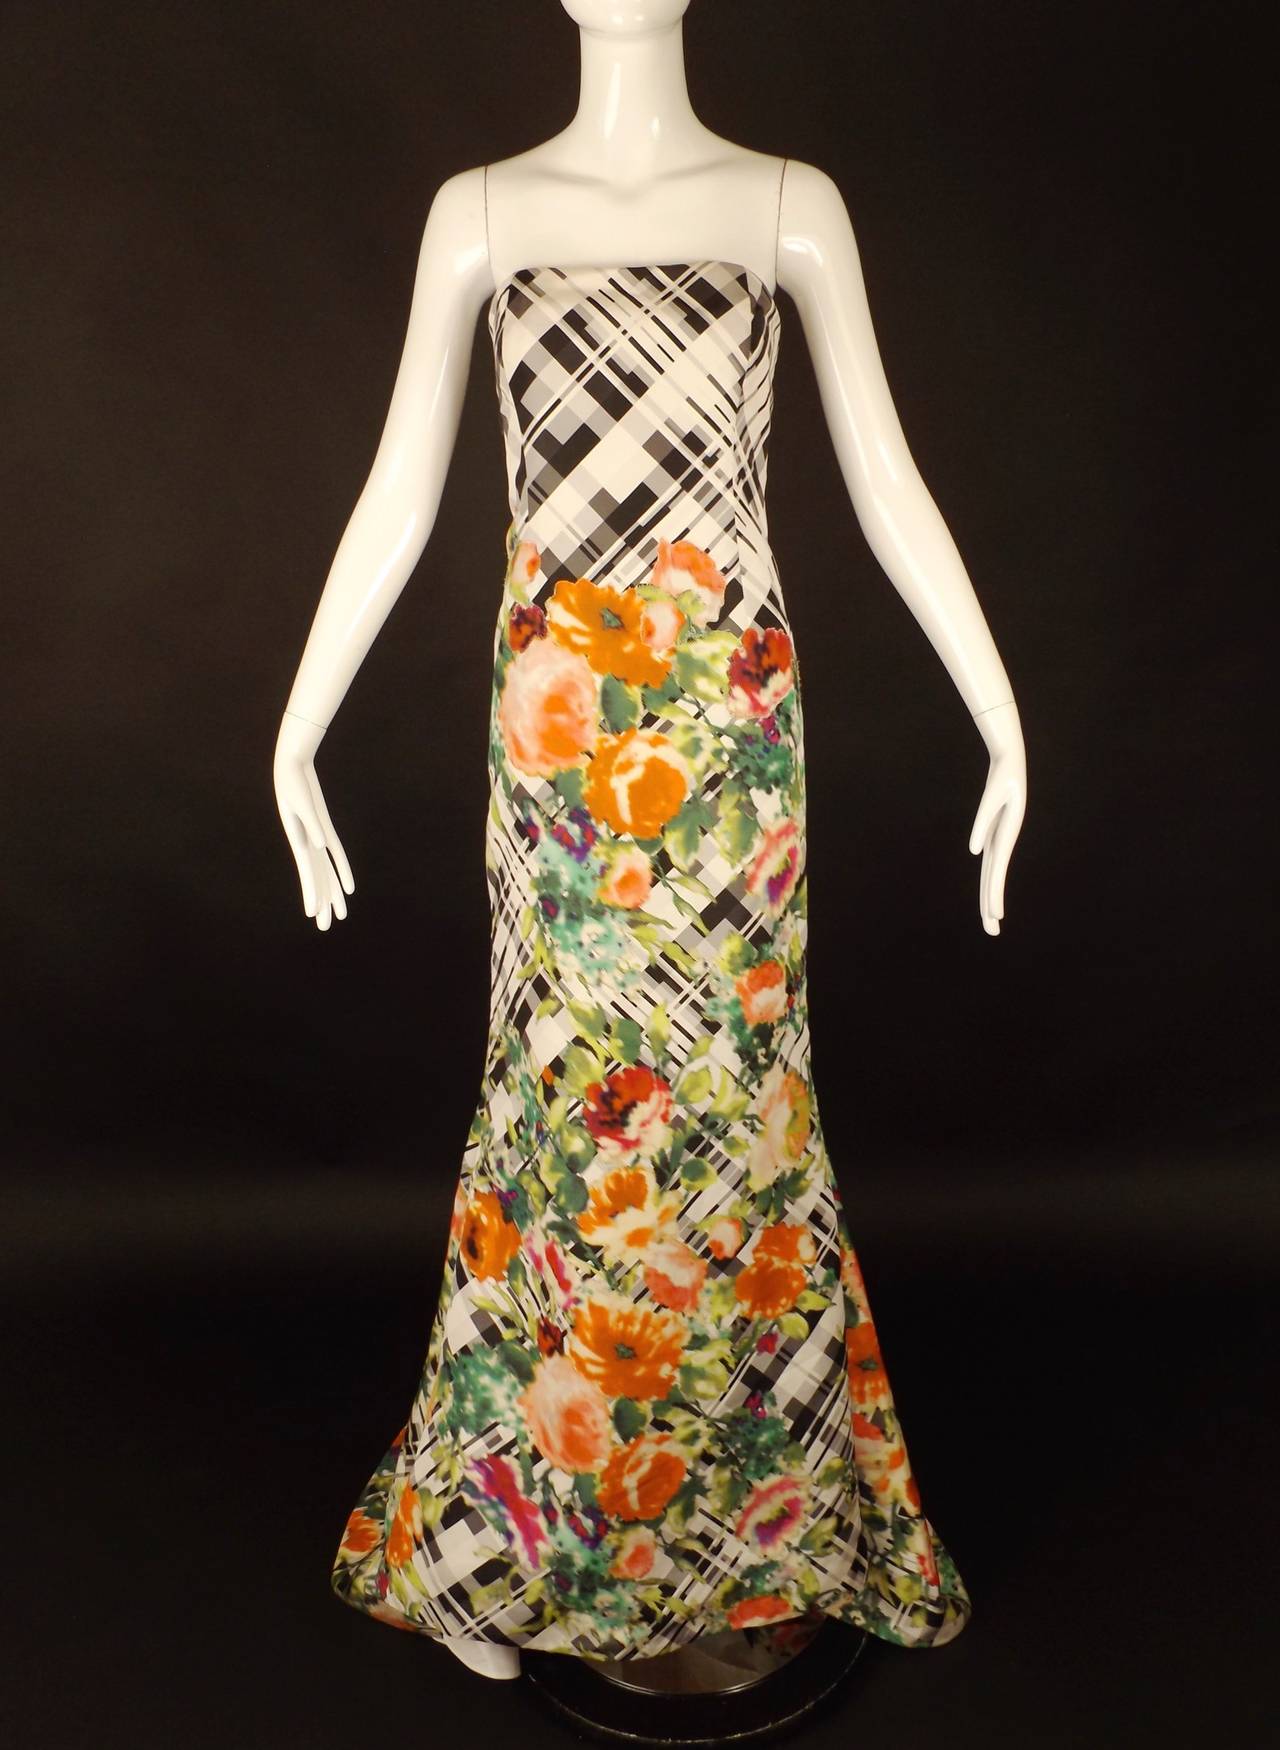 Resort, 2014 runway collection. Stunning strapless evening gown in white with a  black plaid pattern and adorned in multi color floral printed appliqués.  The dress is dart fitted with a fluted skirt and a slightly sweeping train across the back.